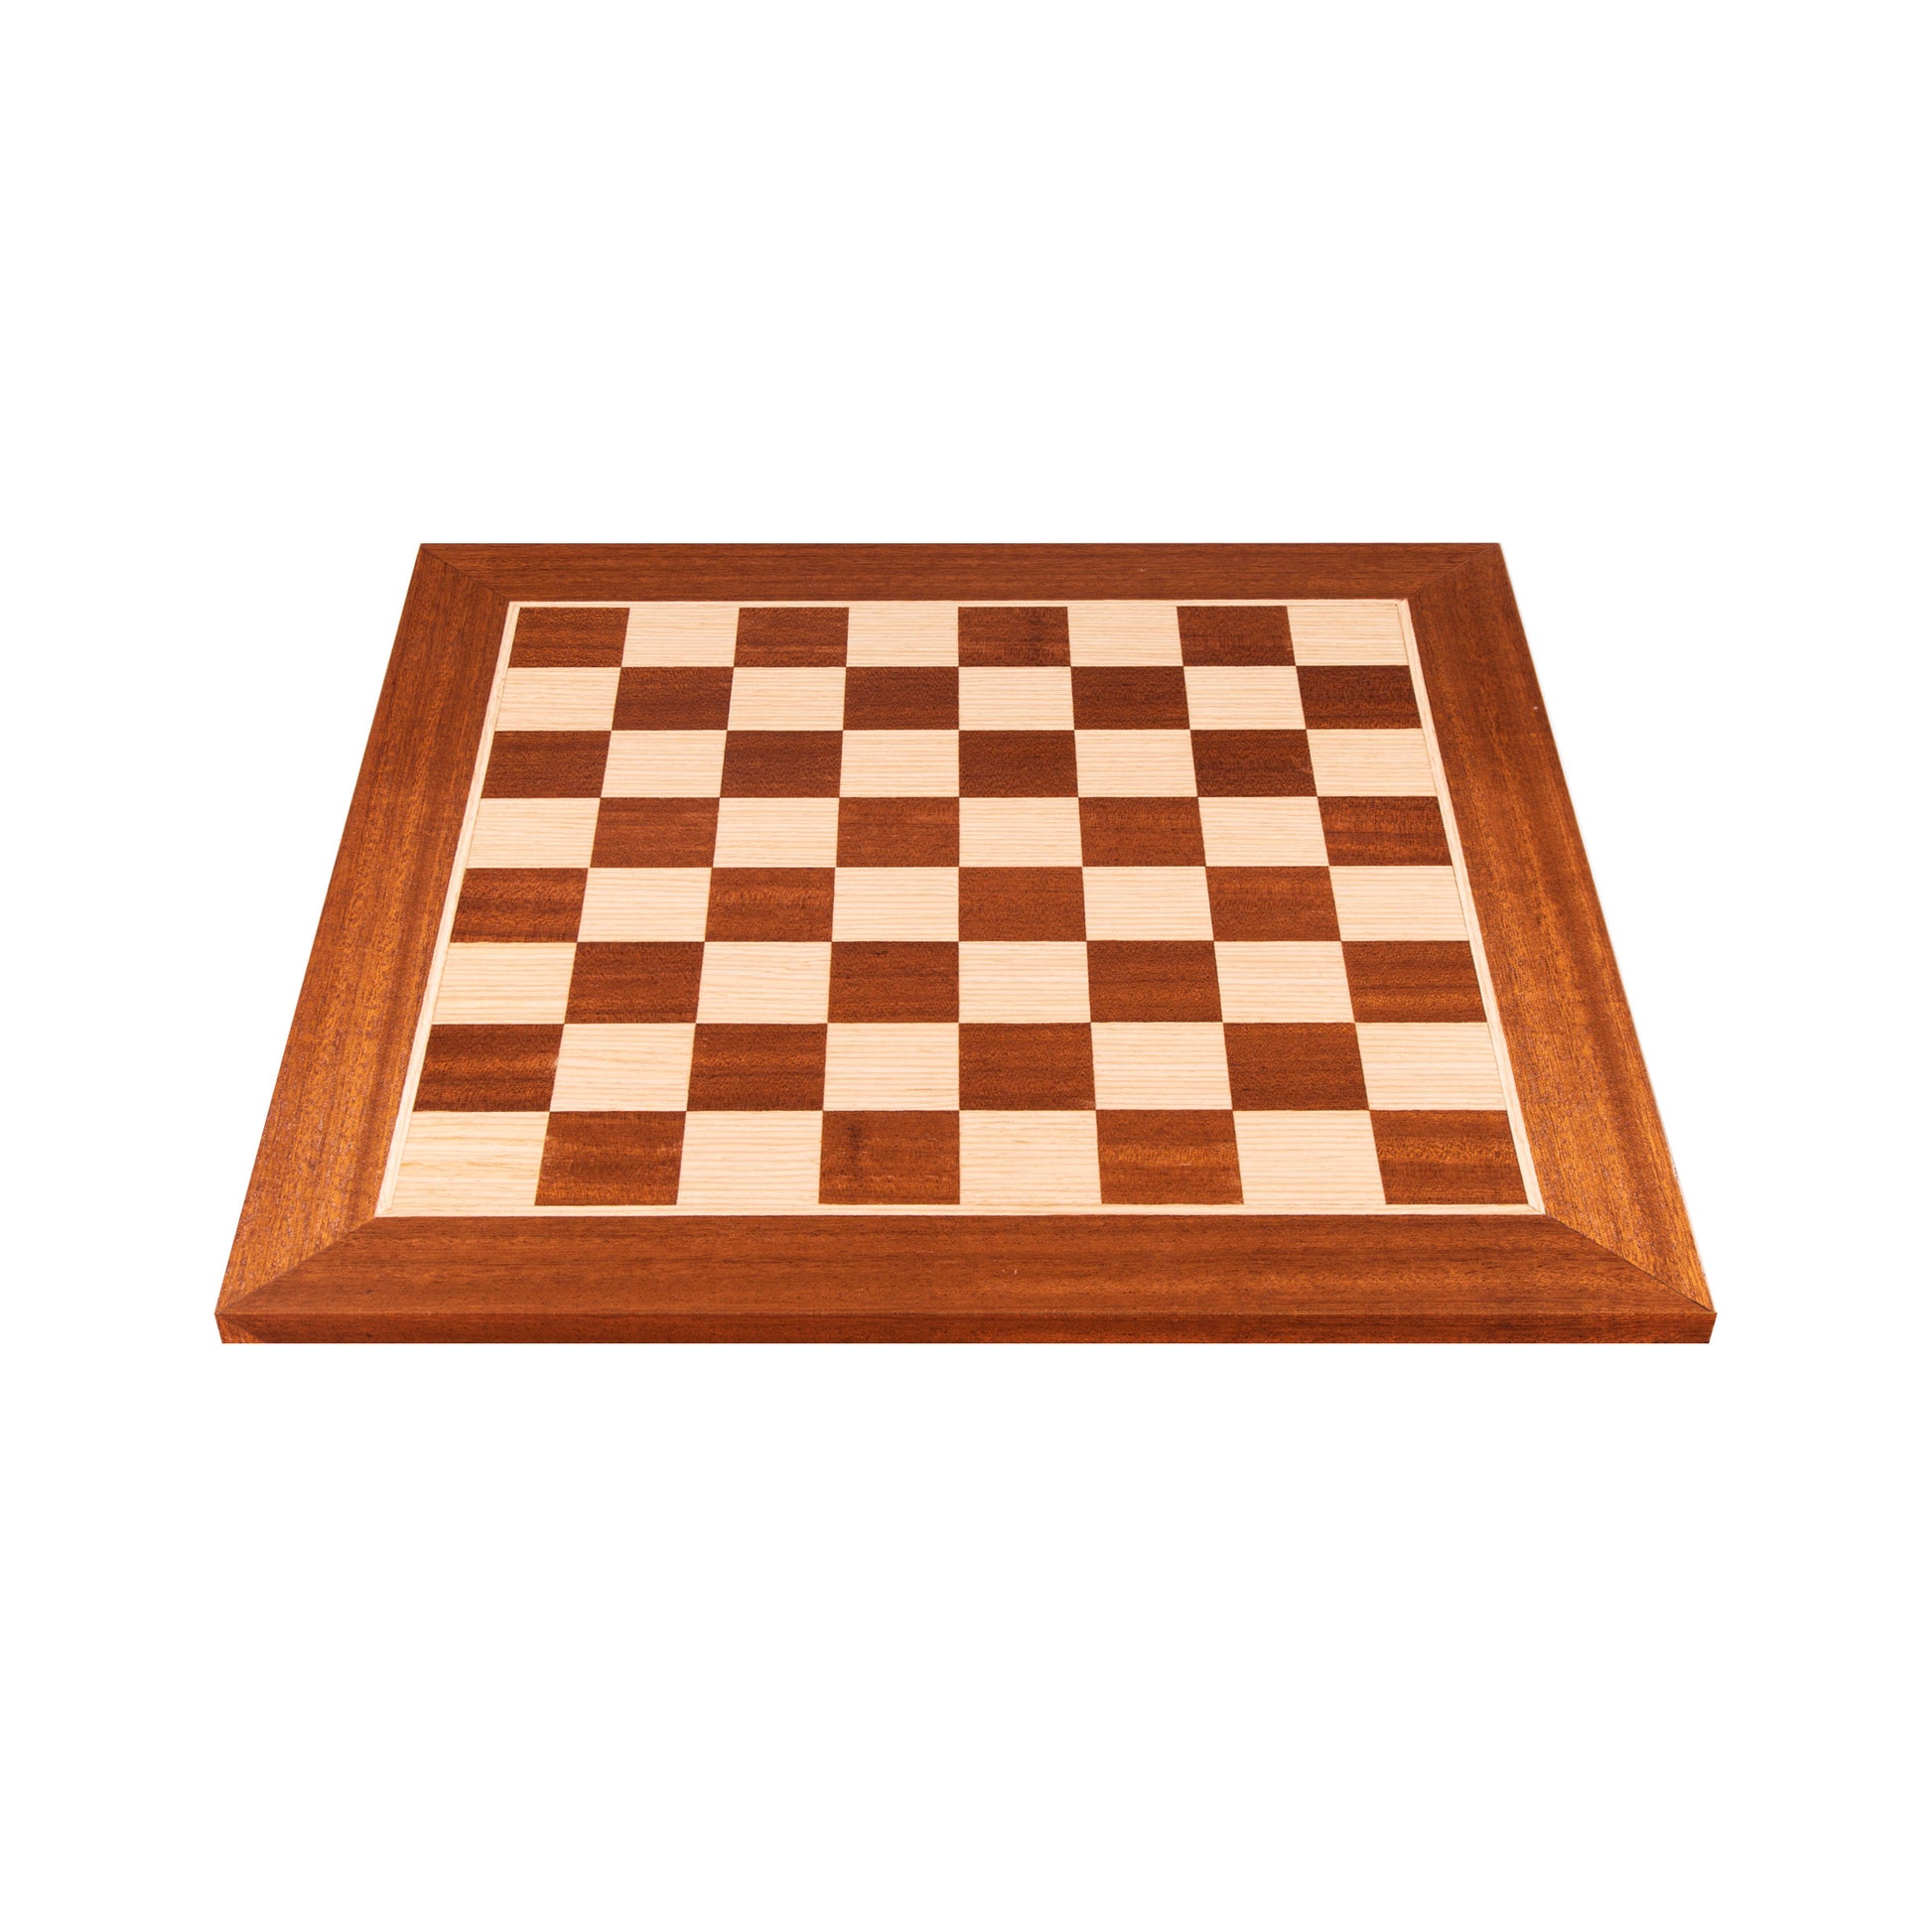 Handcrafted Mahogany Wood & Oak Inlaid Chessboard - 40x40cm (Medium) - Premium Chess from MANOPOULOS Chess & Backgammon - Just €55! Shop now at MANOPOULOS Chess & Backgammon